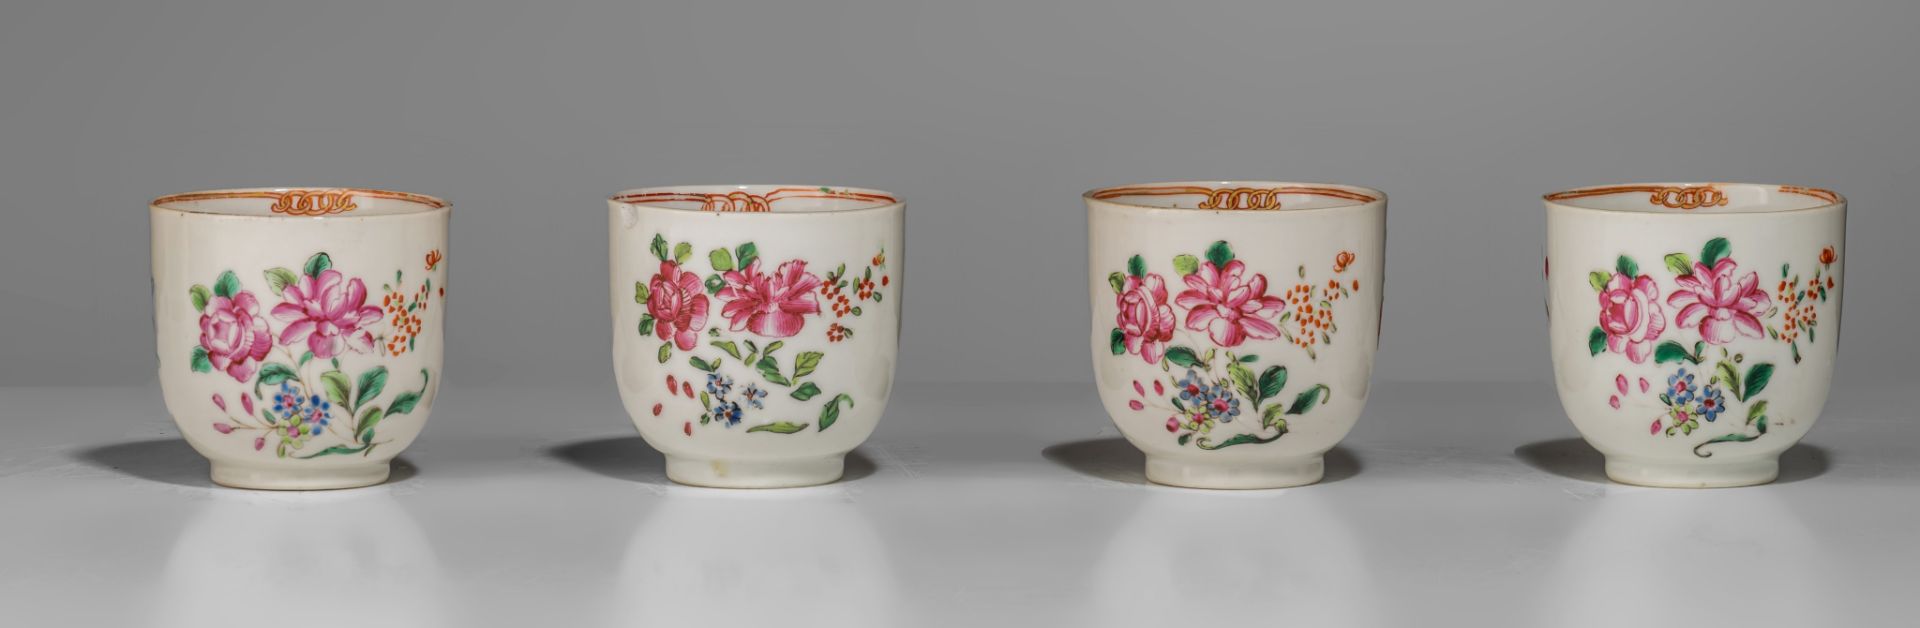 A collection of famille rose and gilt decorated export porcelain ware, 18thC, largest - H 12,5 - 34, - Image 16 of 20